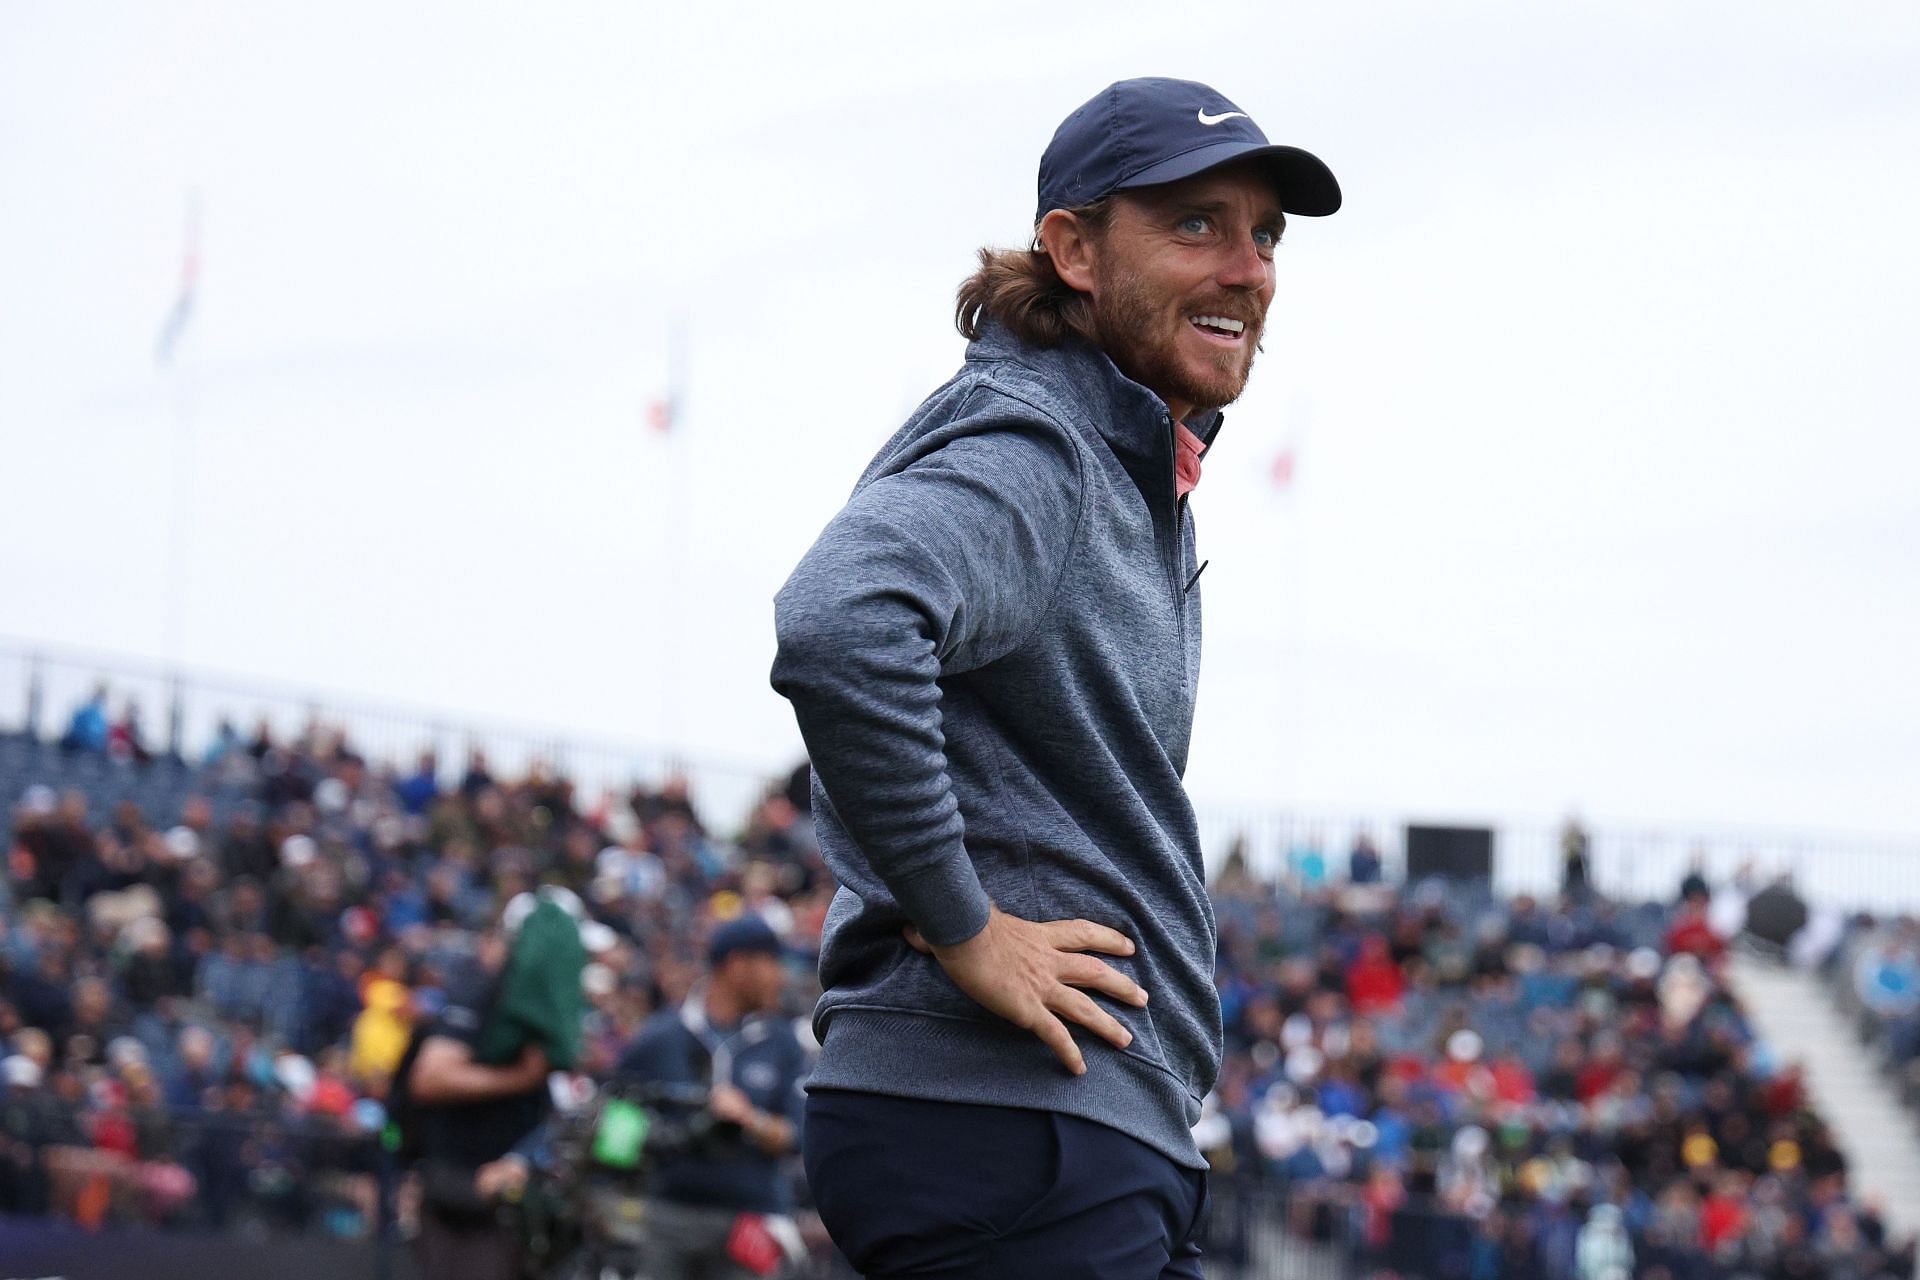 Tommy Fleetwood is placed second after round 2 of the 151st Open